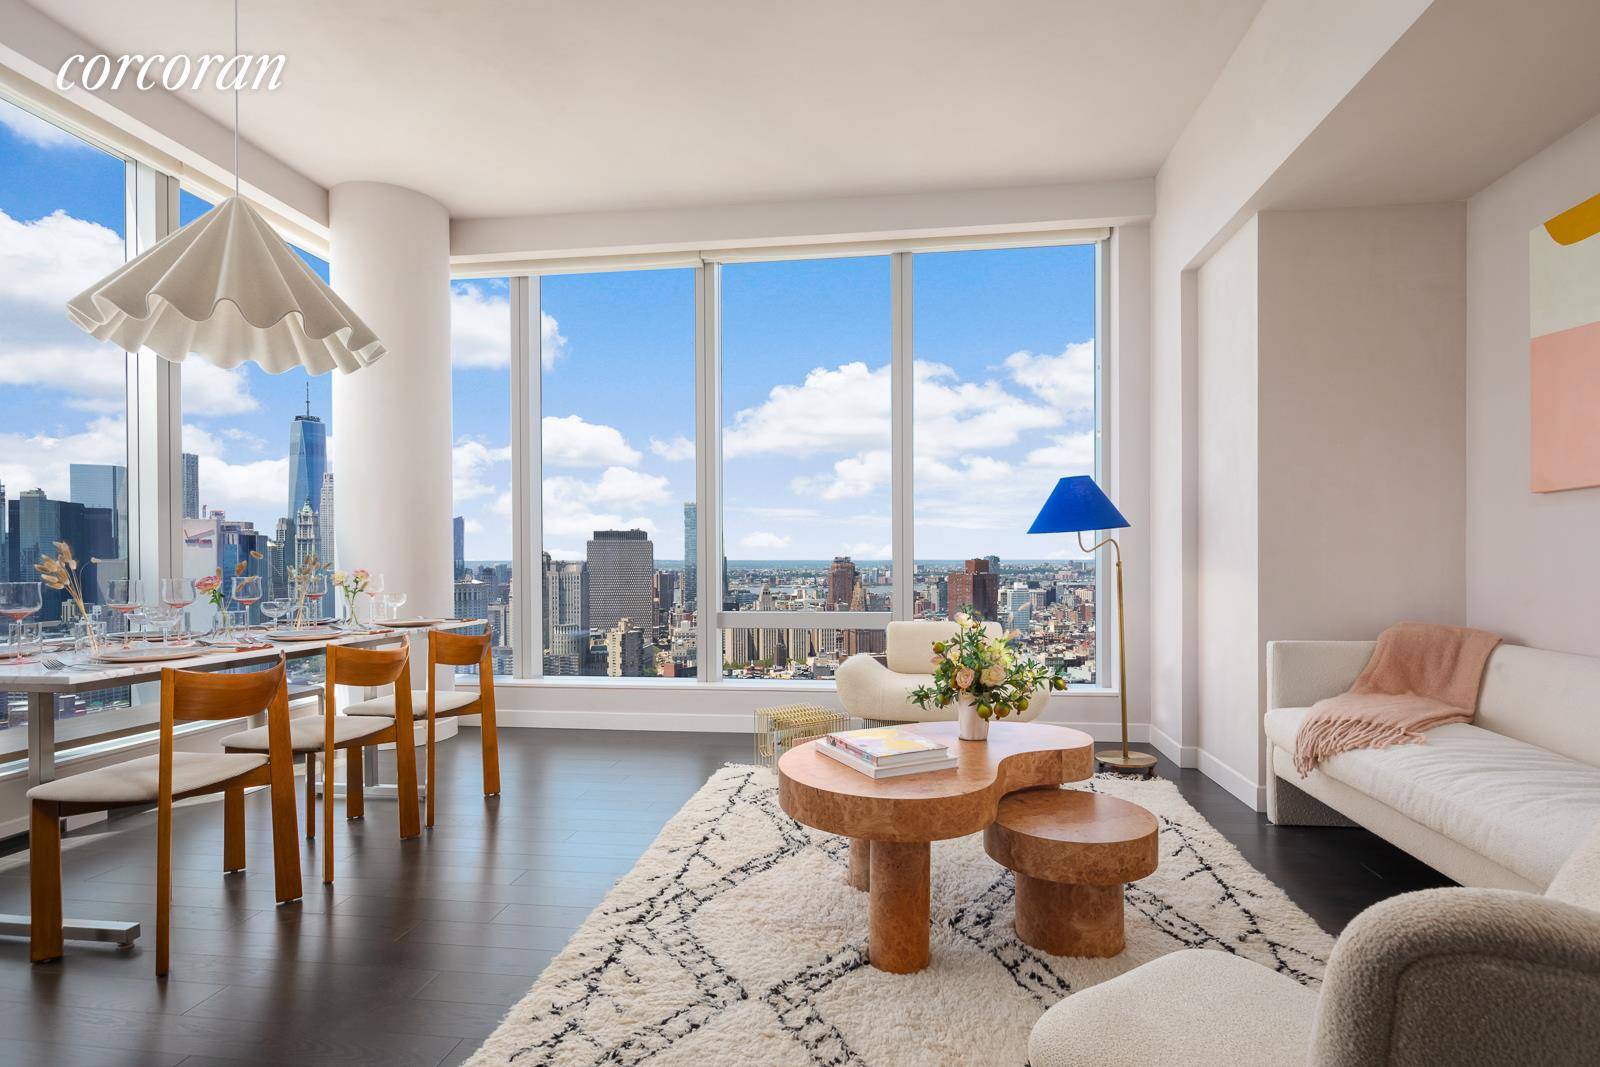 ONE MANHATTAN SQUARE OFFERS ONE OF THE LAST 20 YEAR TAX ABATEMENTS AVAILABLE IN NEW YORK CITY Residence 9M is a 1, 123 square foot two bedroom, two bathroom with ...